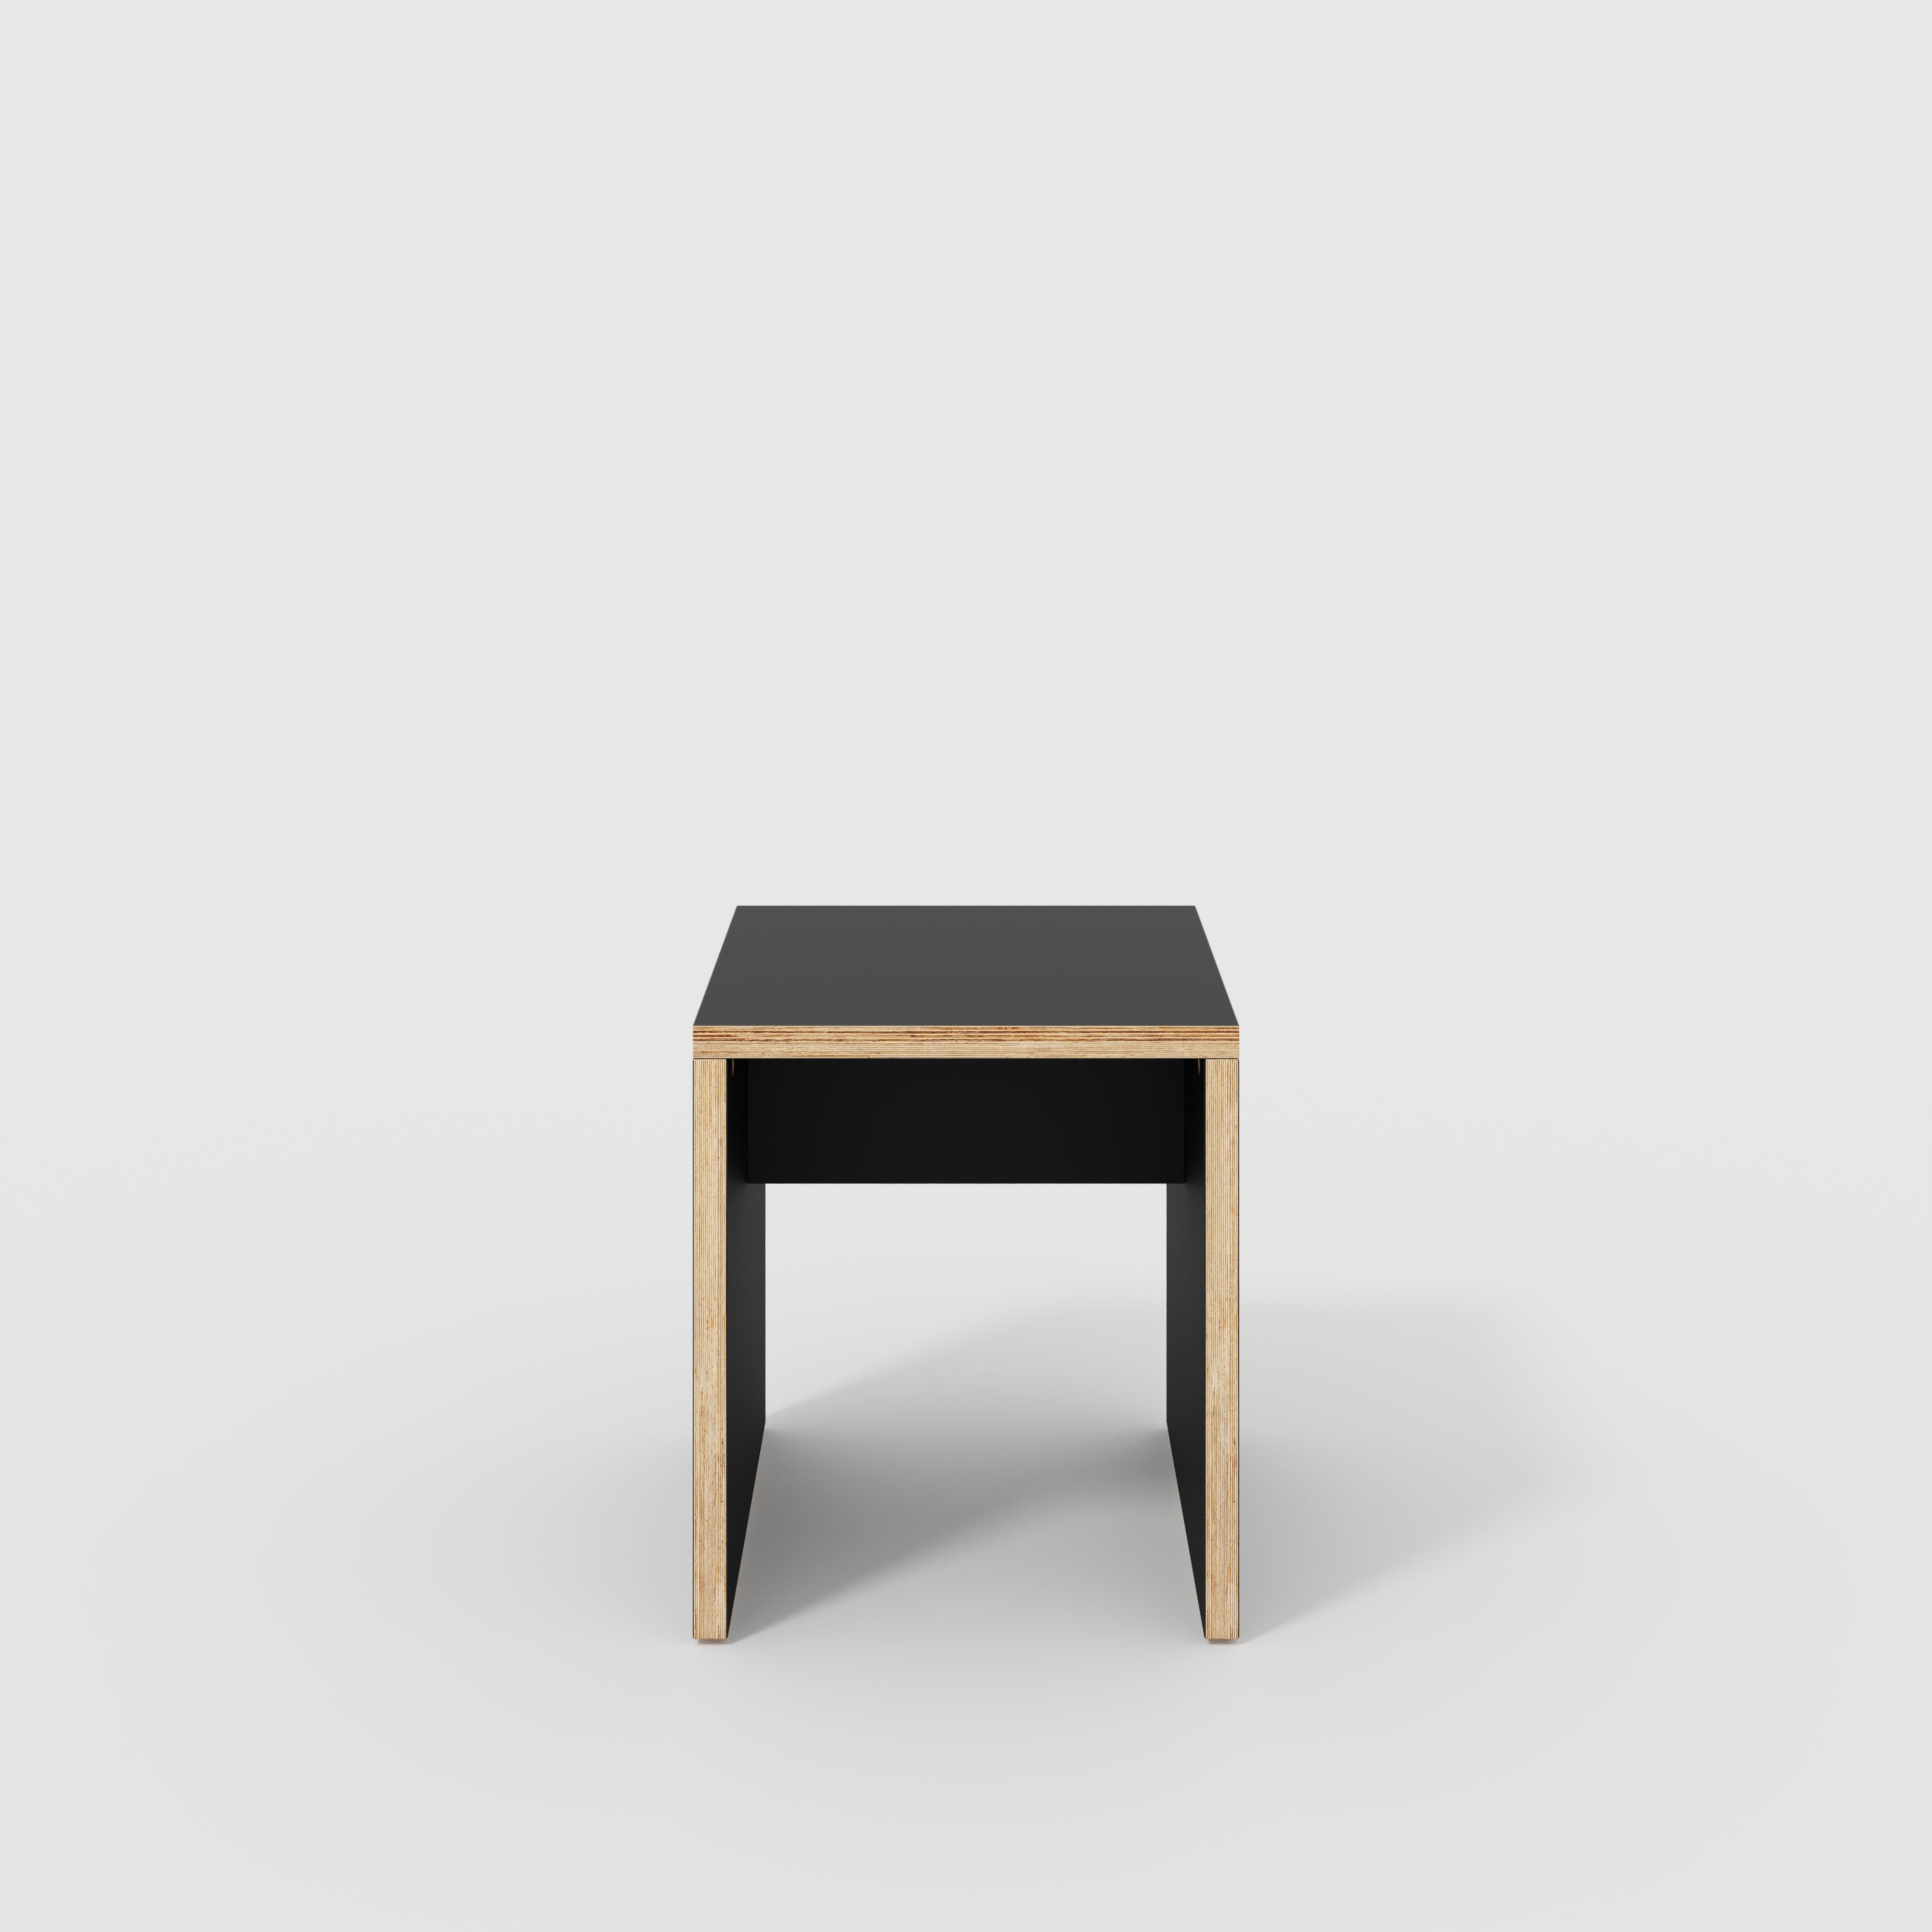 Stool with Solid Sides - Formica Diamond Black - 400(w) x 400(d) x 450(h)